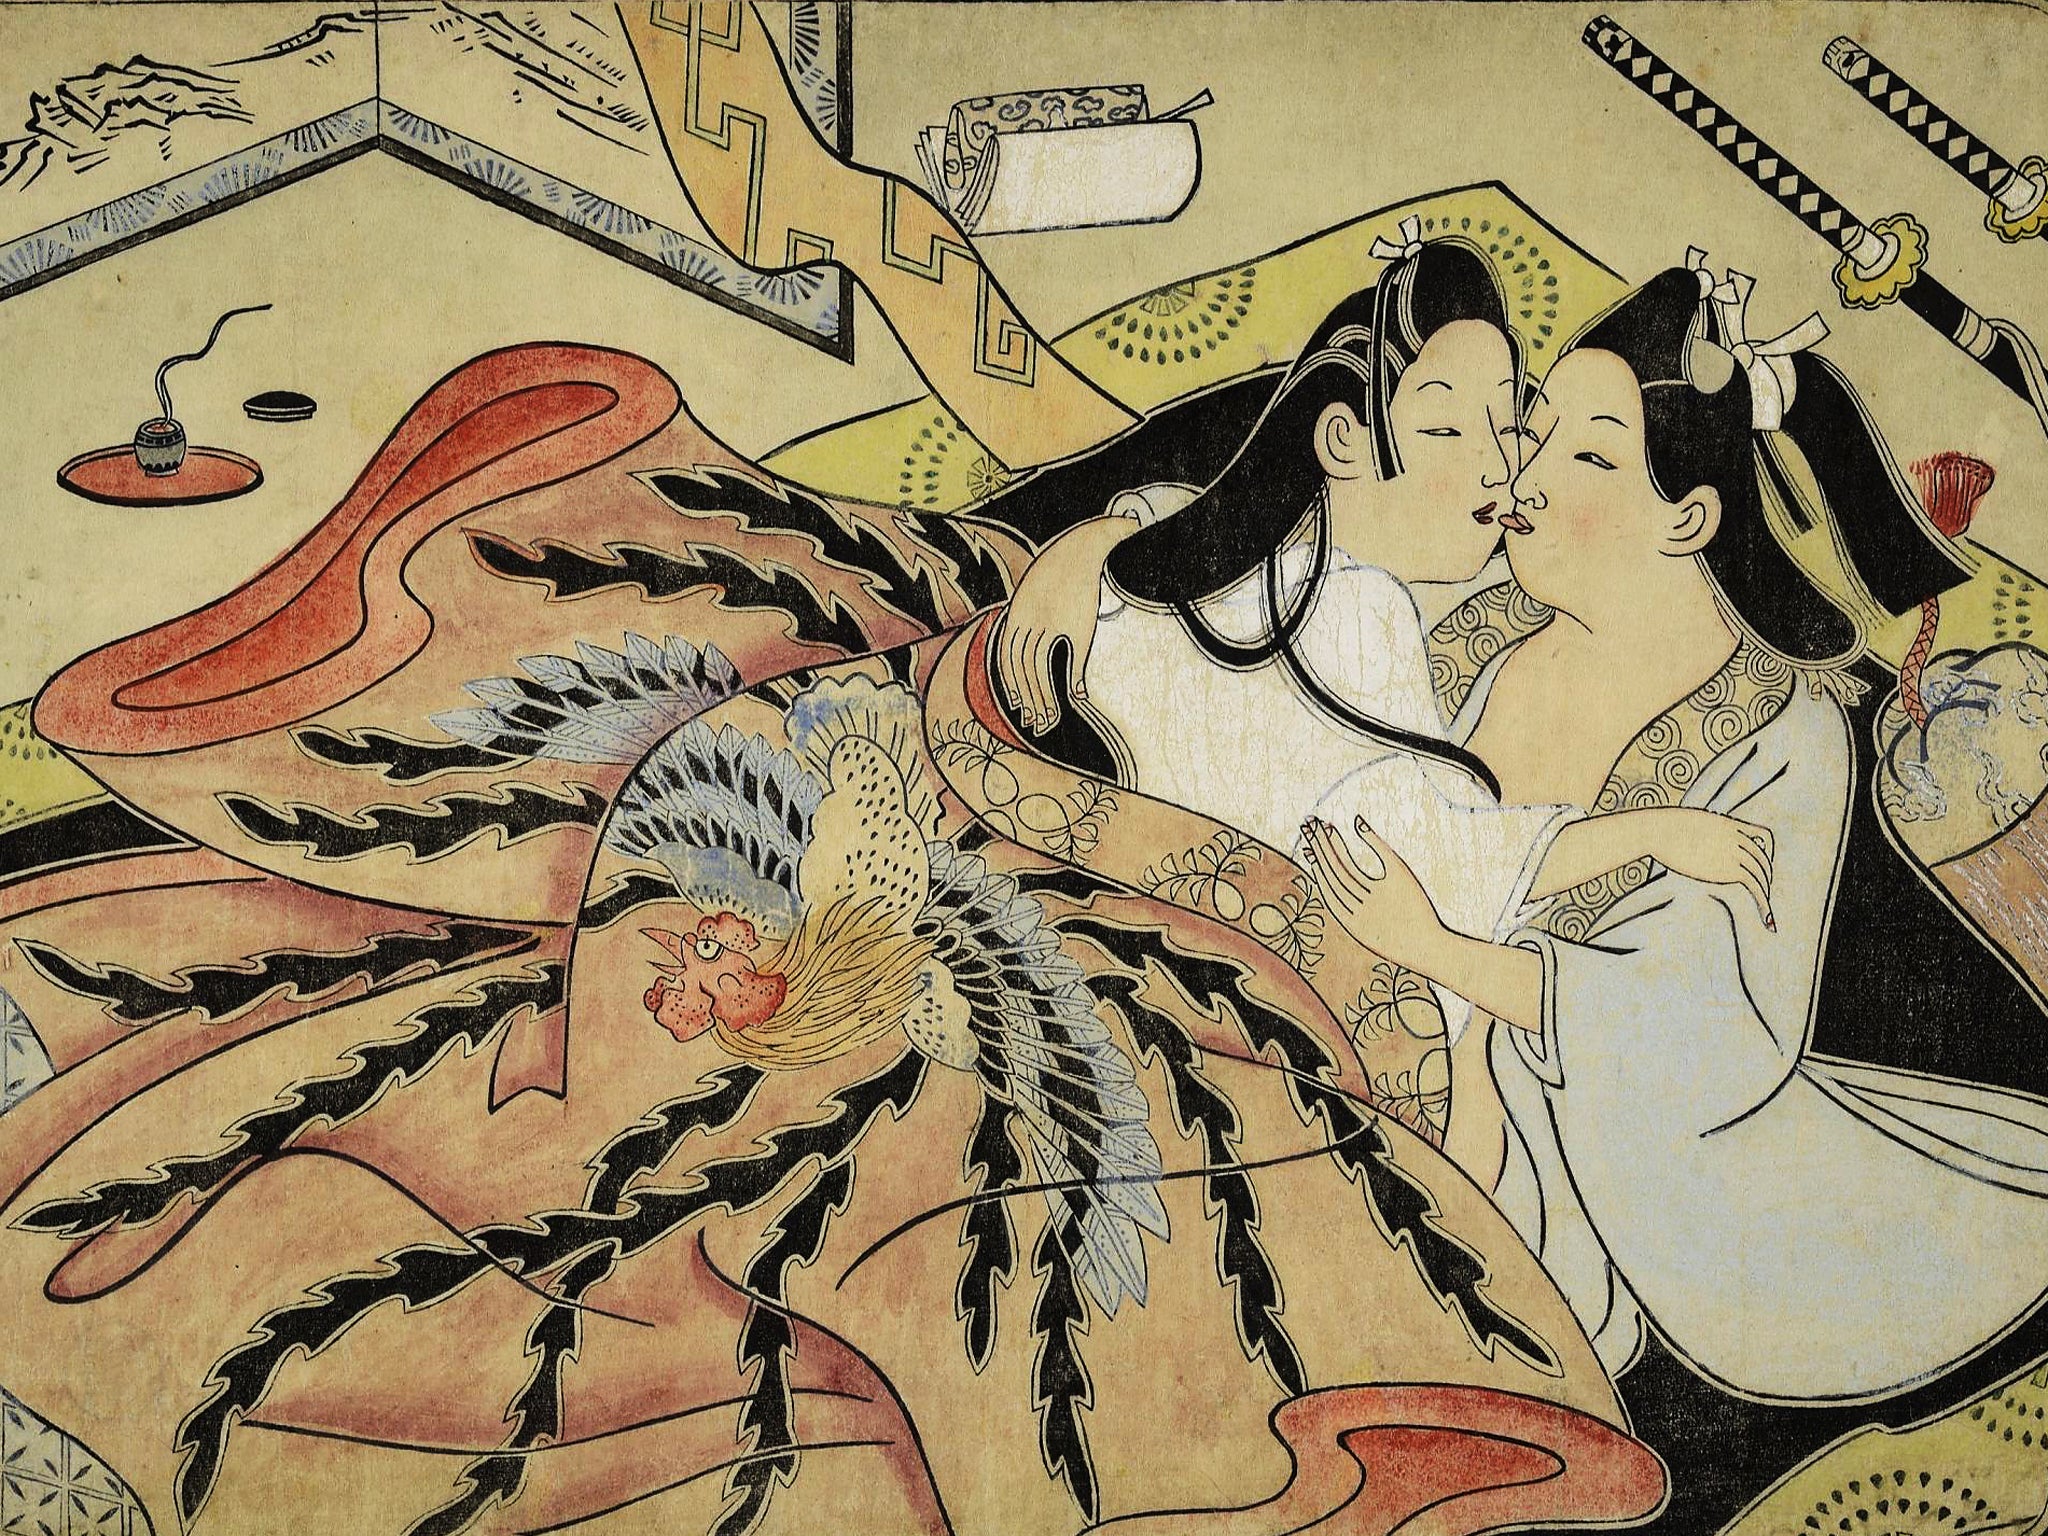 The largest show of Japanese erotic artworks ever seen The Independent The Independent picture